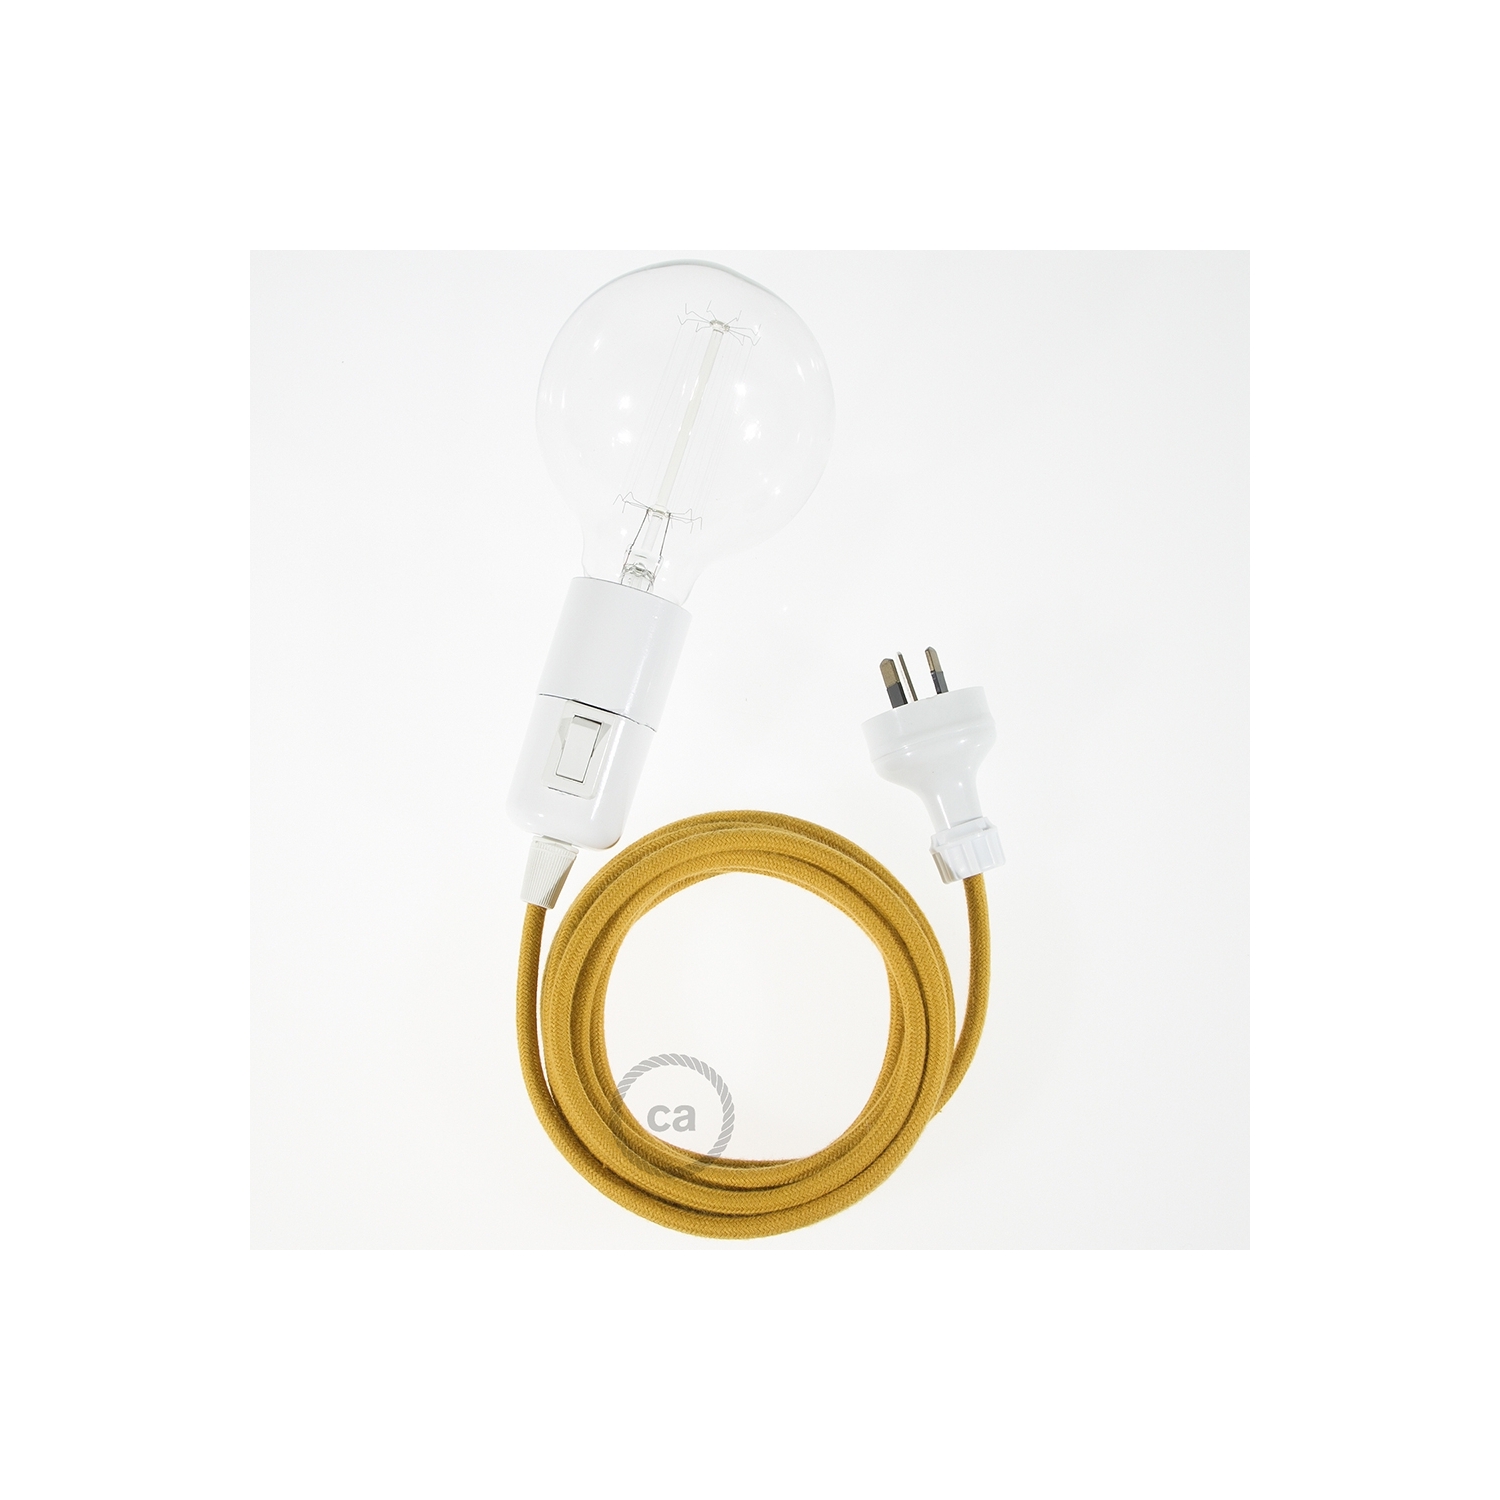 Create your RC31 Golden Honey Cotton Snake and bring the light wherever you want.